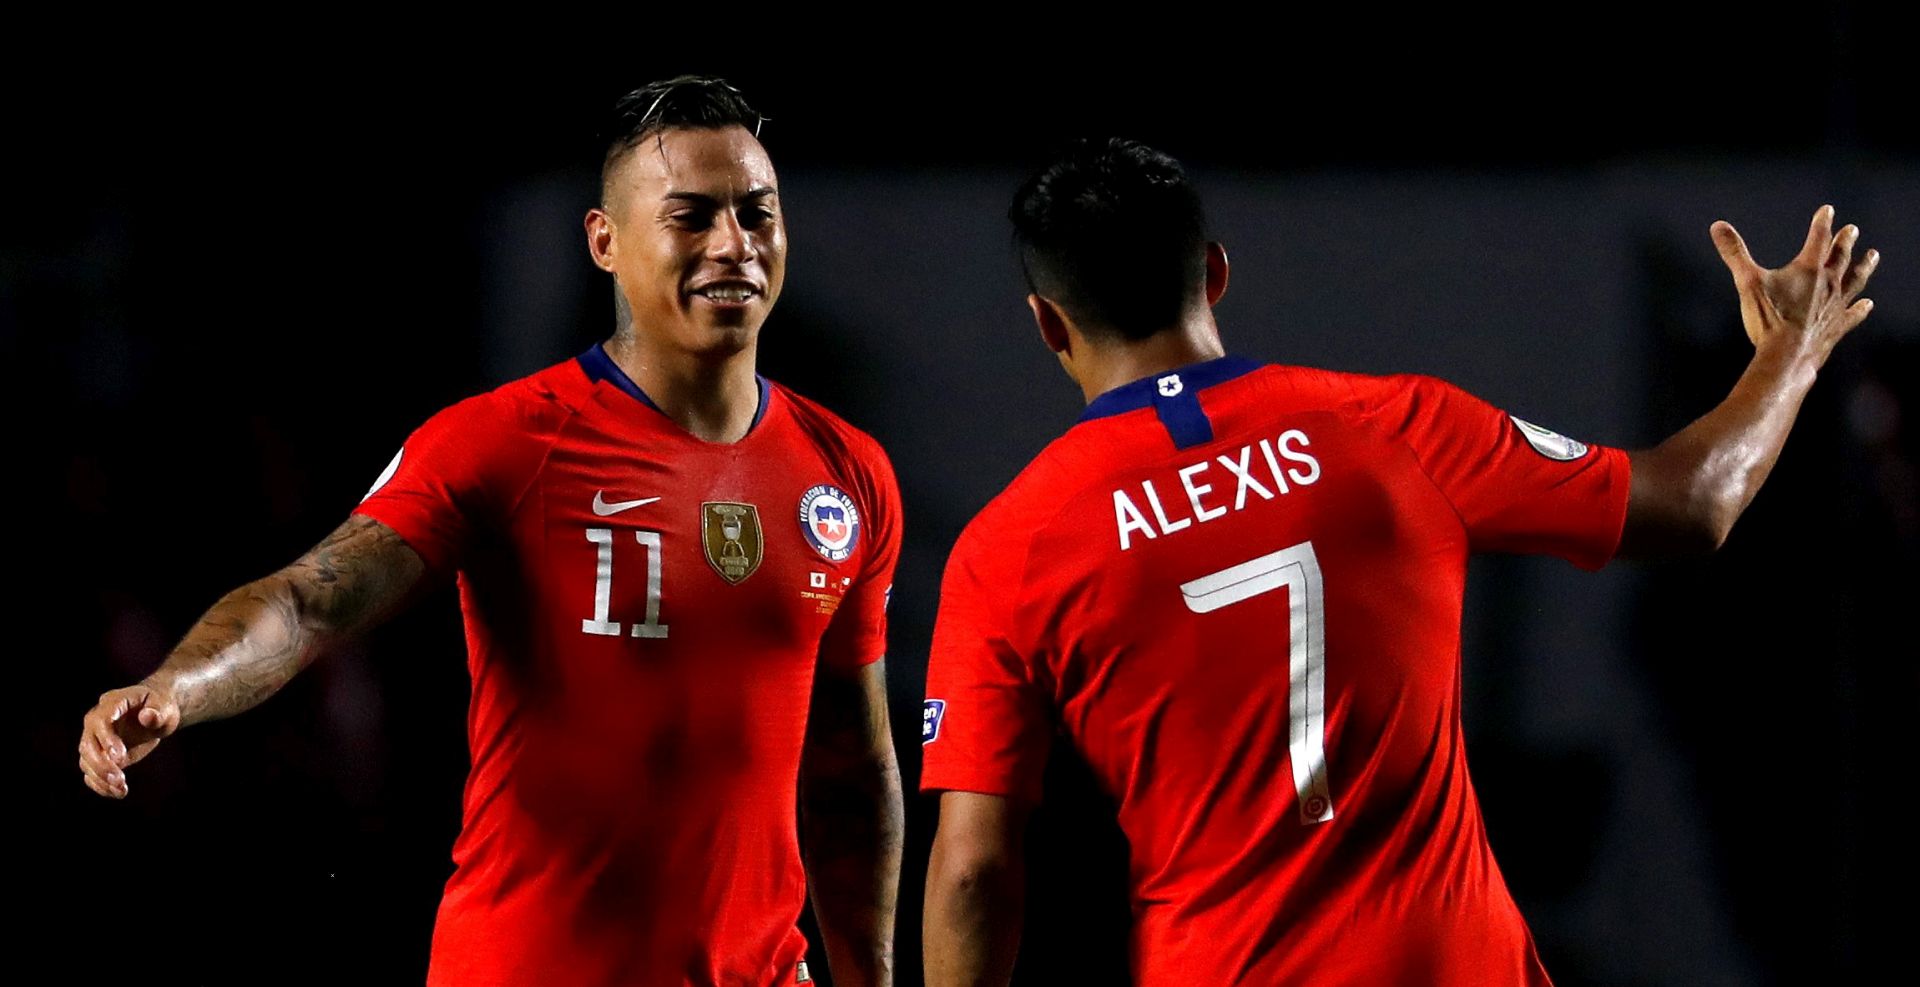 epa07654857 Eduardo Vargas (L) and Alexis Sanchez (R) of Chile celebrate during the Copa America 2019 Group C soccer match between Japan and Chile at Morumbi Stadium in Sao Paulo, Brazil, 17 June 2019.  EPA/Paulo Whitaker